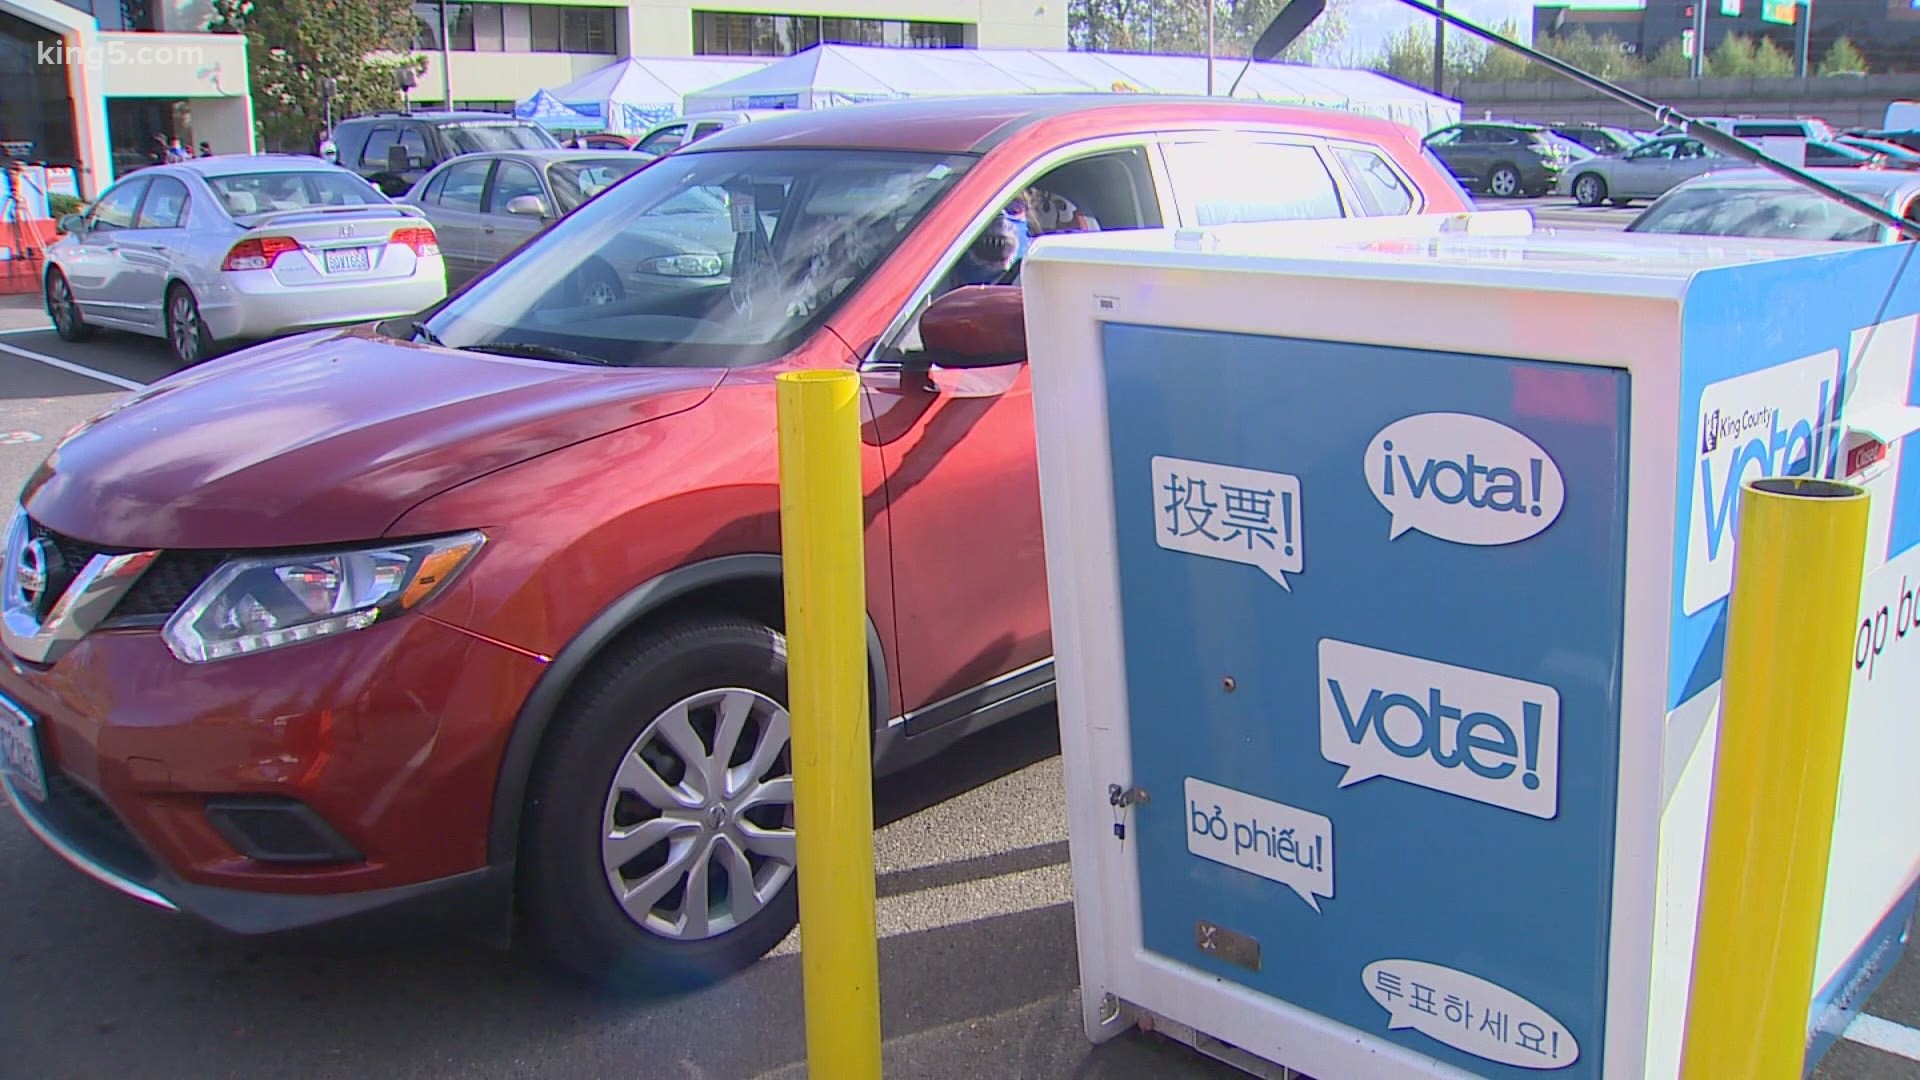 King County has an unprecedented number of early votes submitted this election season.